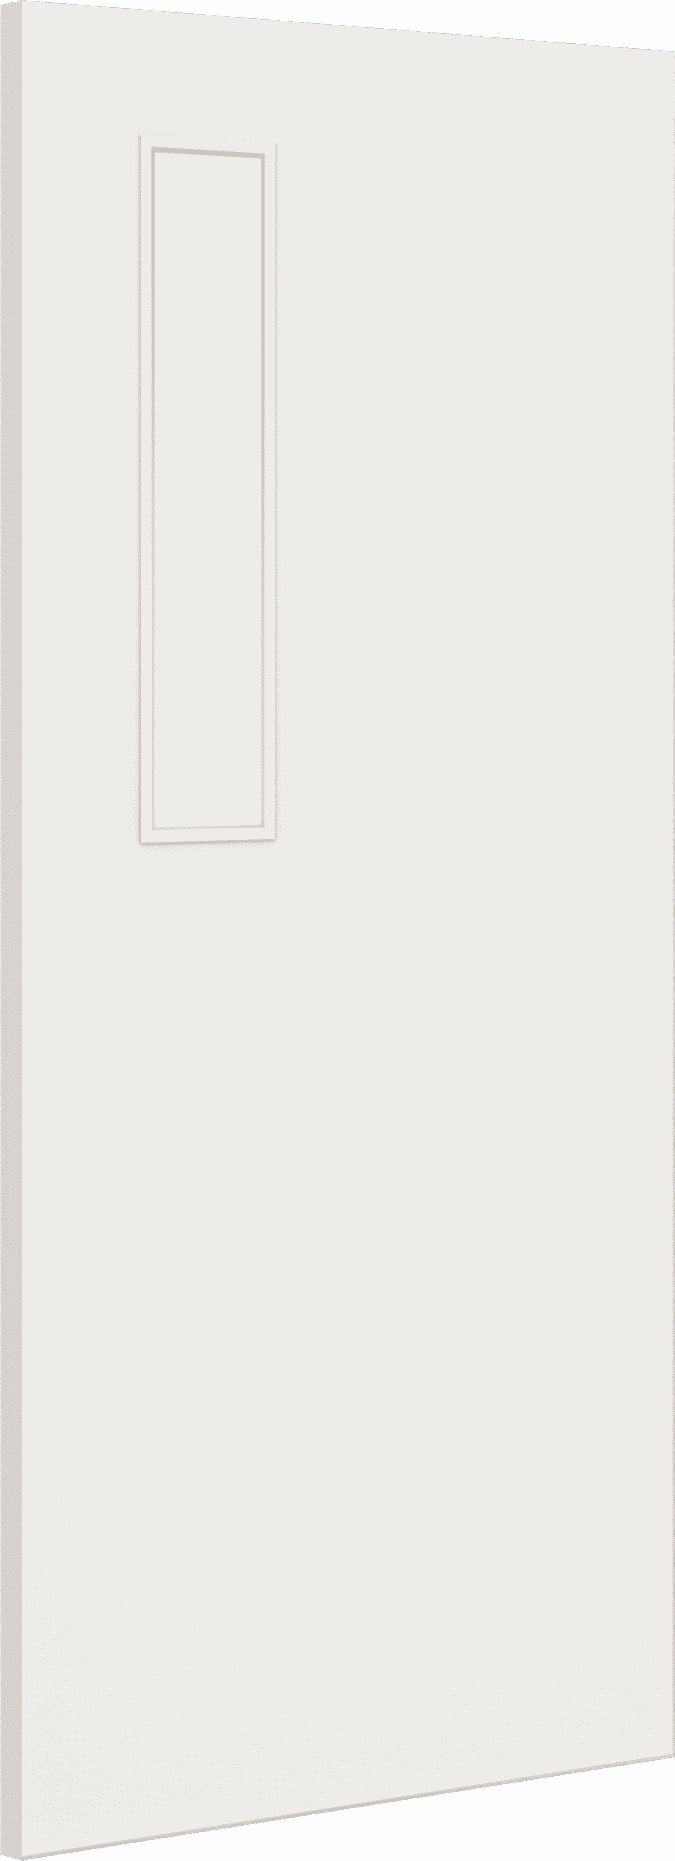 1981mm x 762mm x 44mm (30") Architectural Paint Grade White 08 Frosted Glazed Fire Door Blank